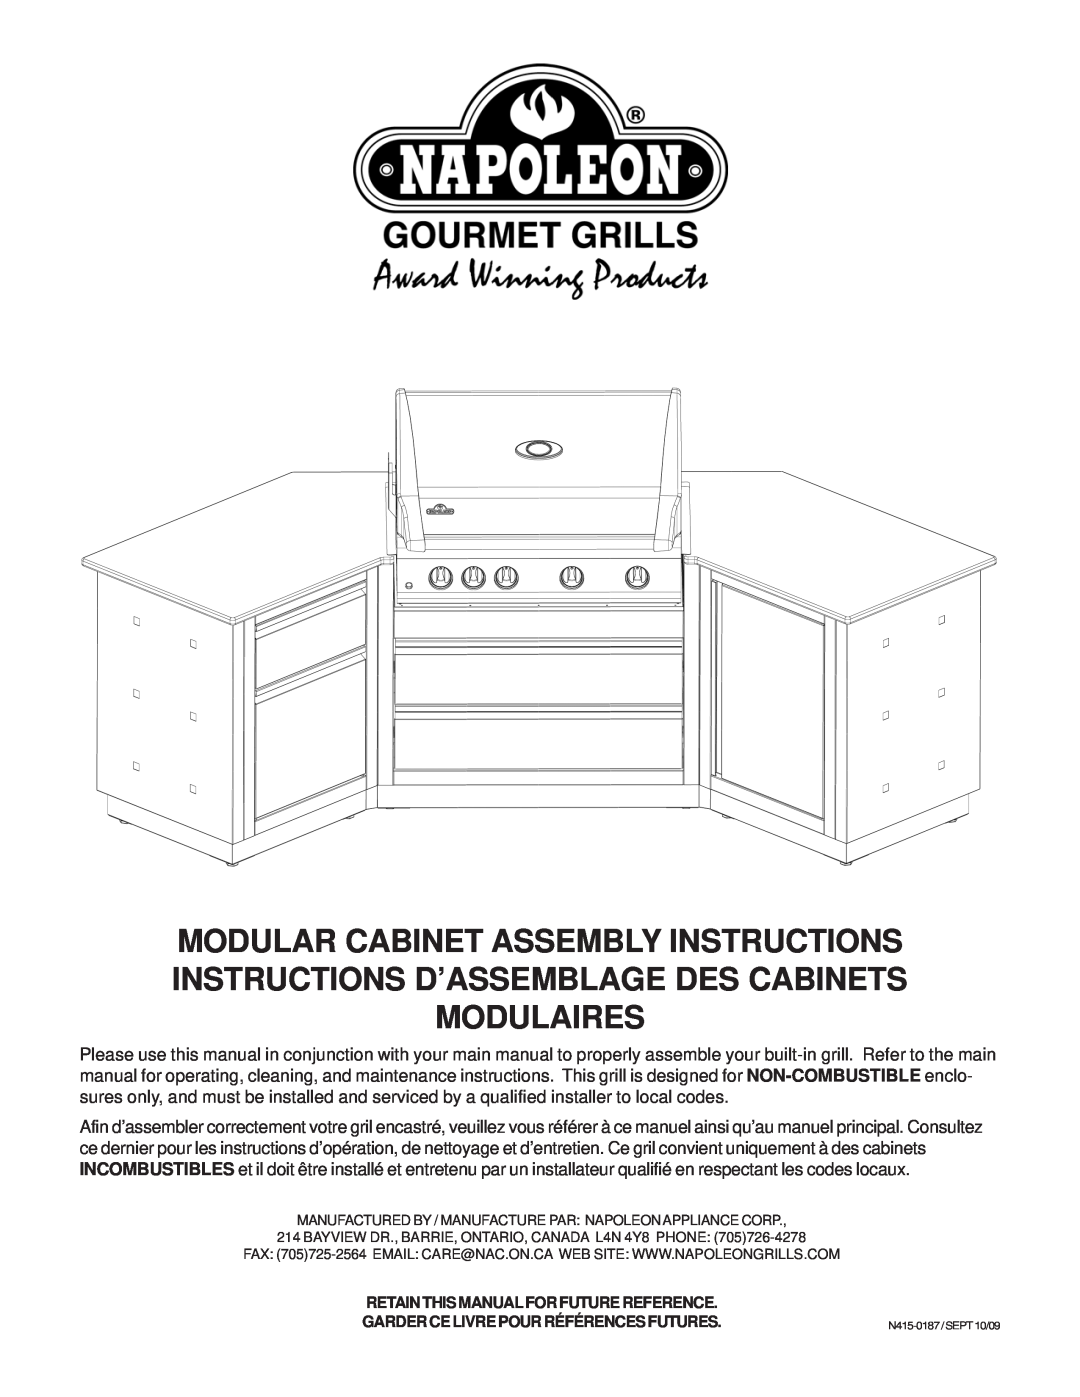 Napoleon Grills 2032-OS, 204830-OS manual Manufactured By / Manufacture Par Napoleon Appliance Corp, N415-0187/SEPT10/09 